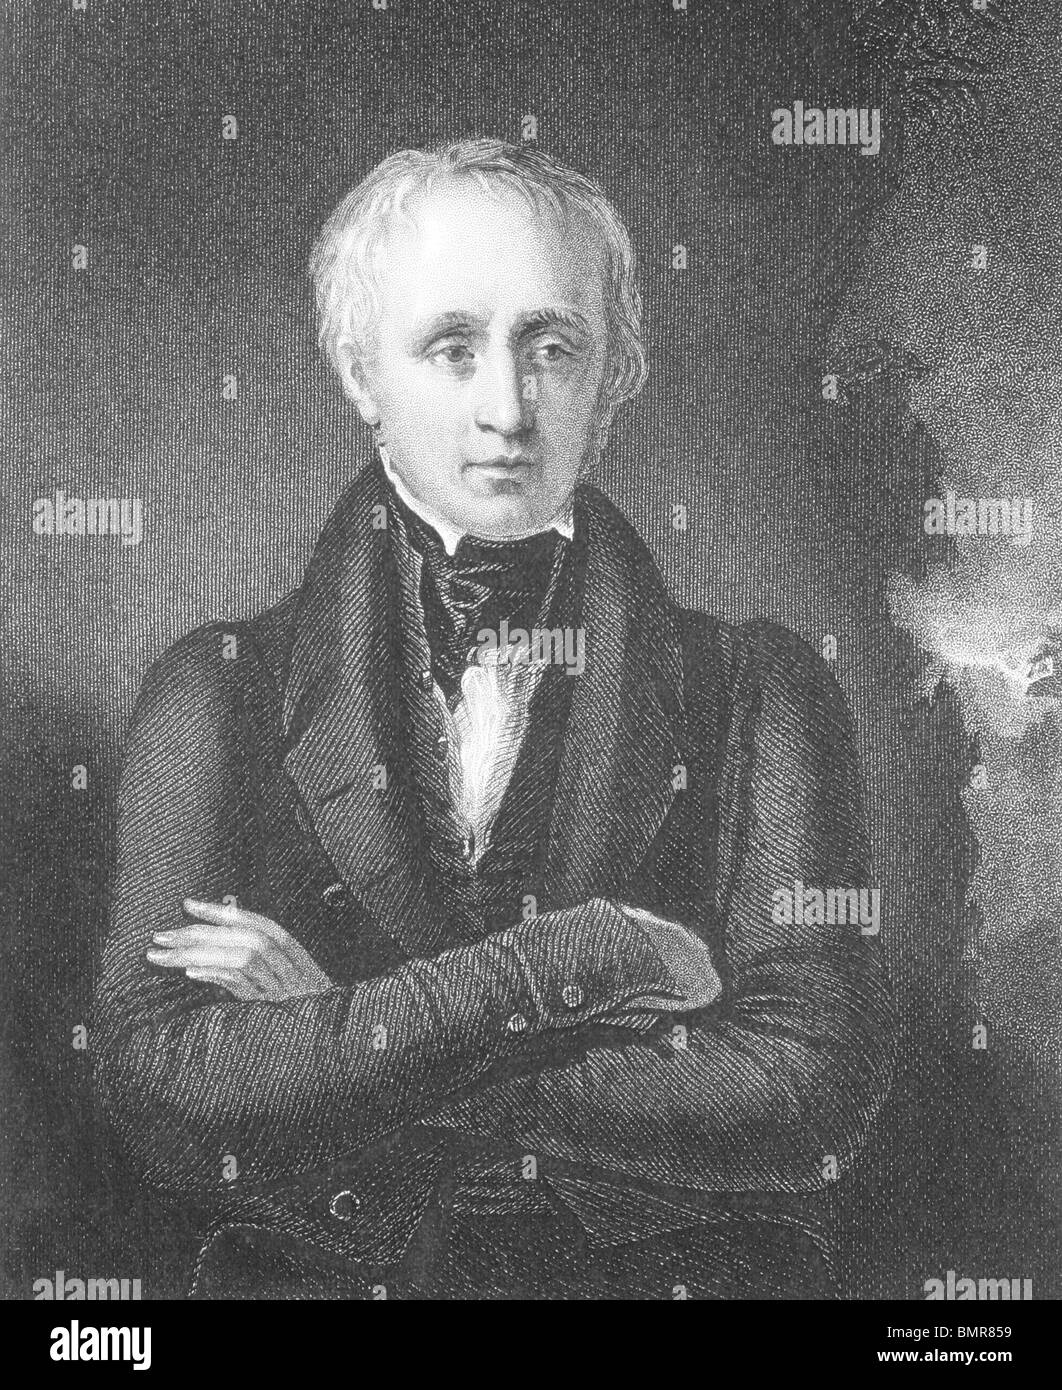 William Wordsworth (1770-1850) on engraving from the 1800s. Important English Romantic poet. Stock Photo